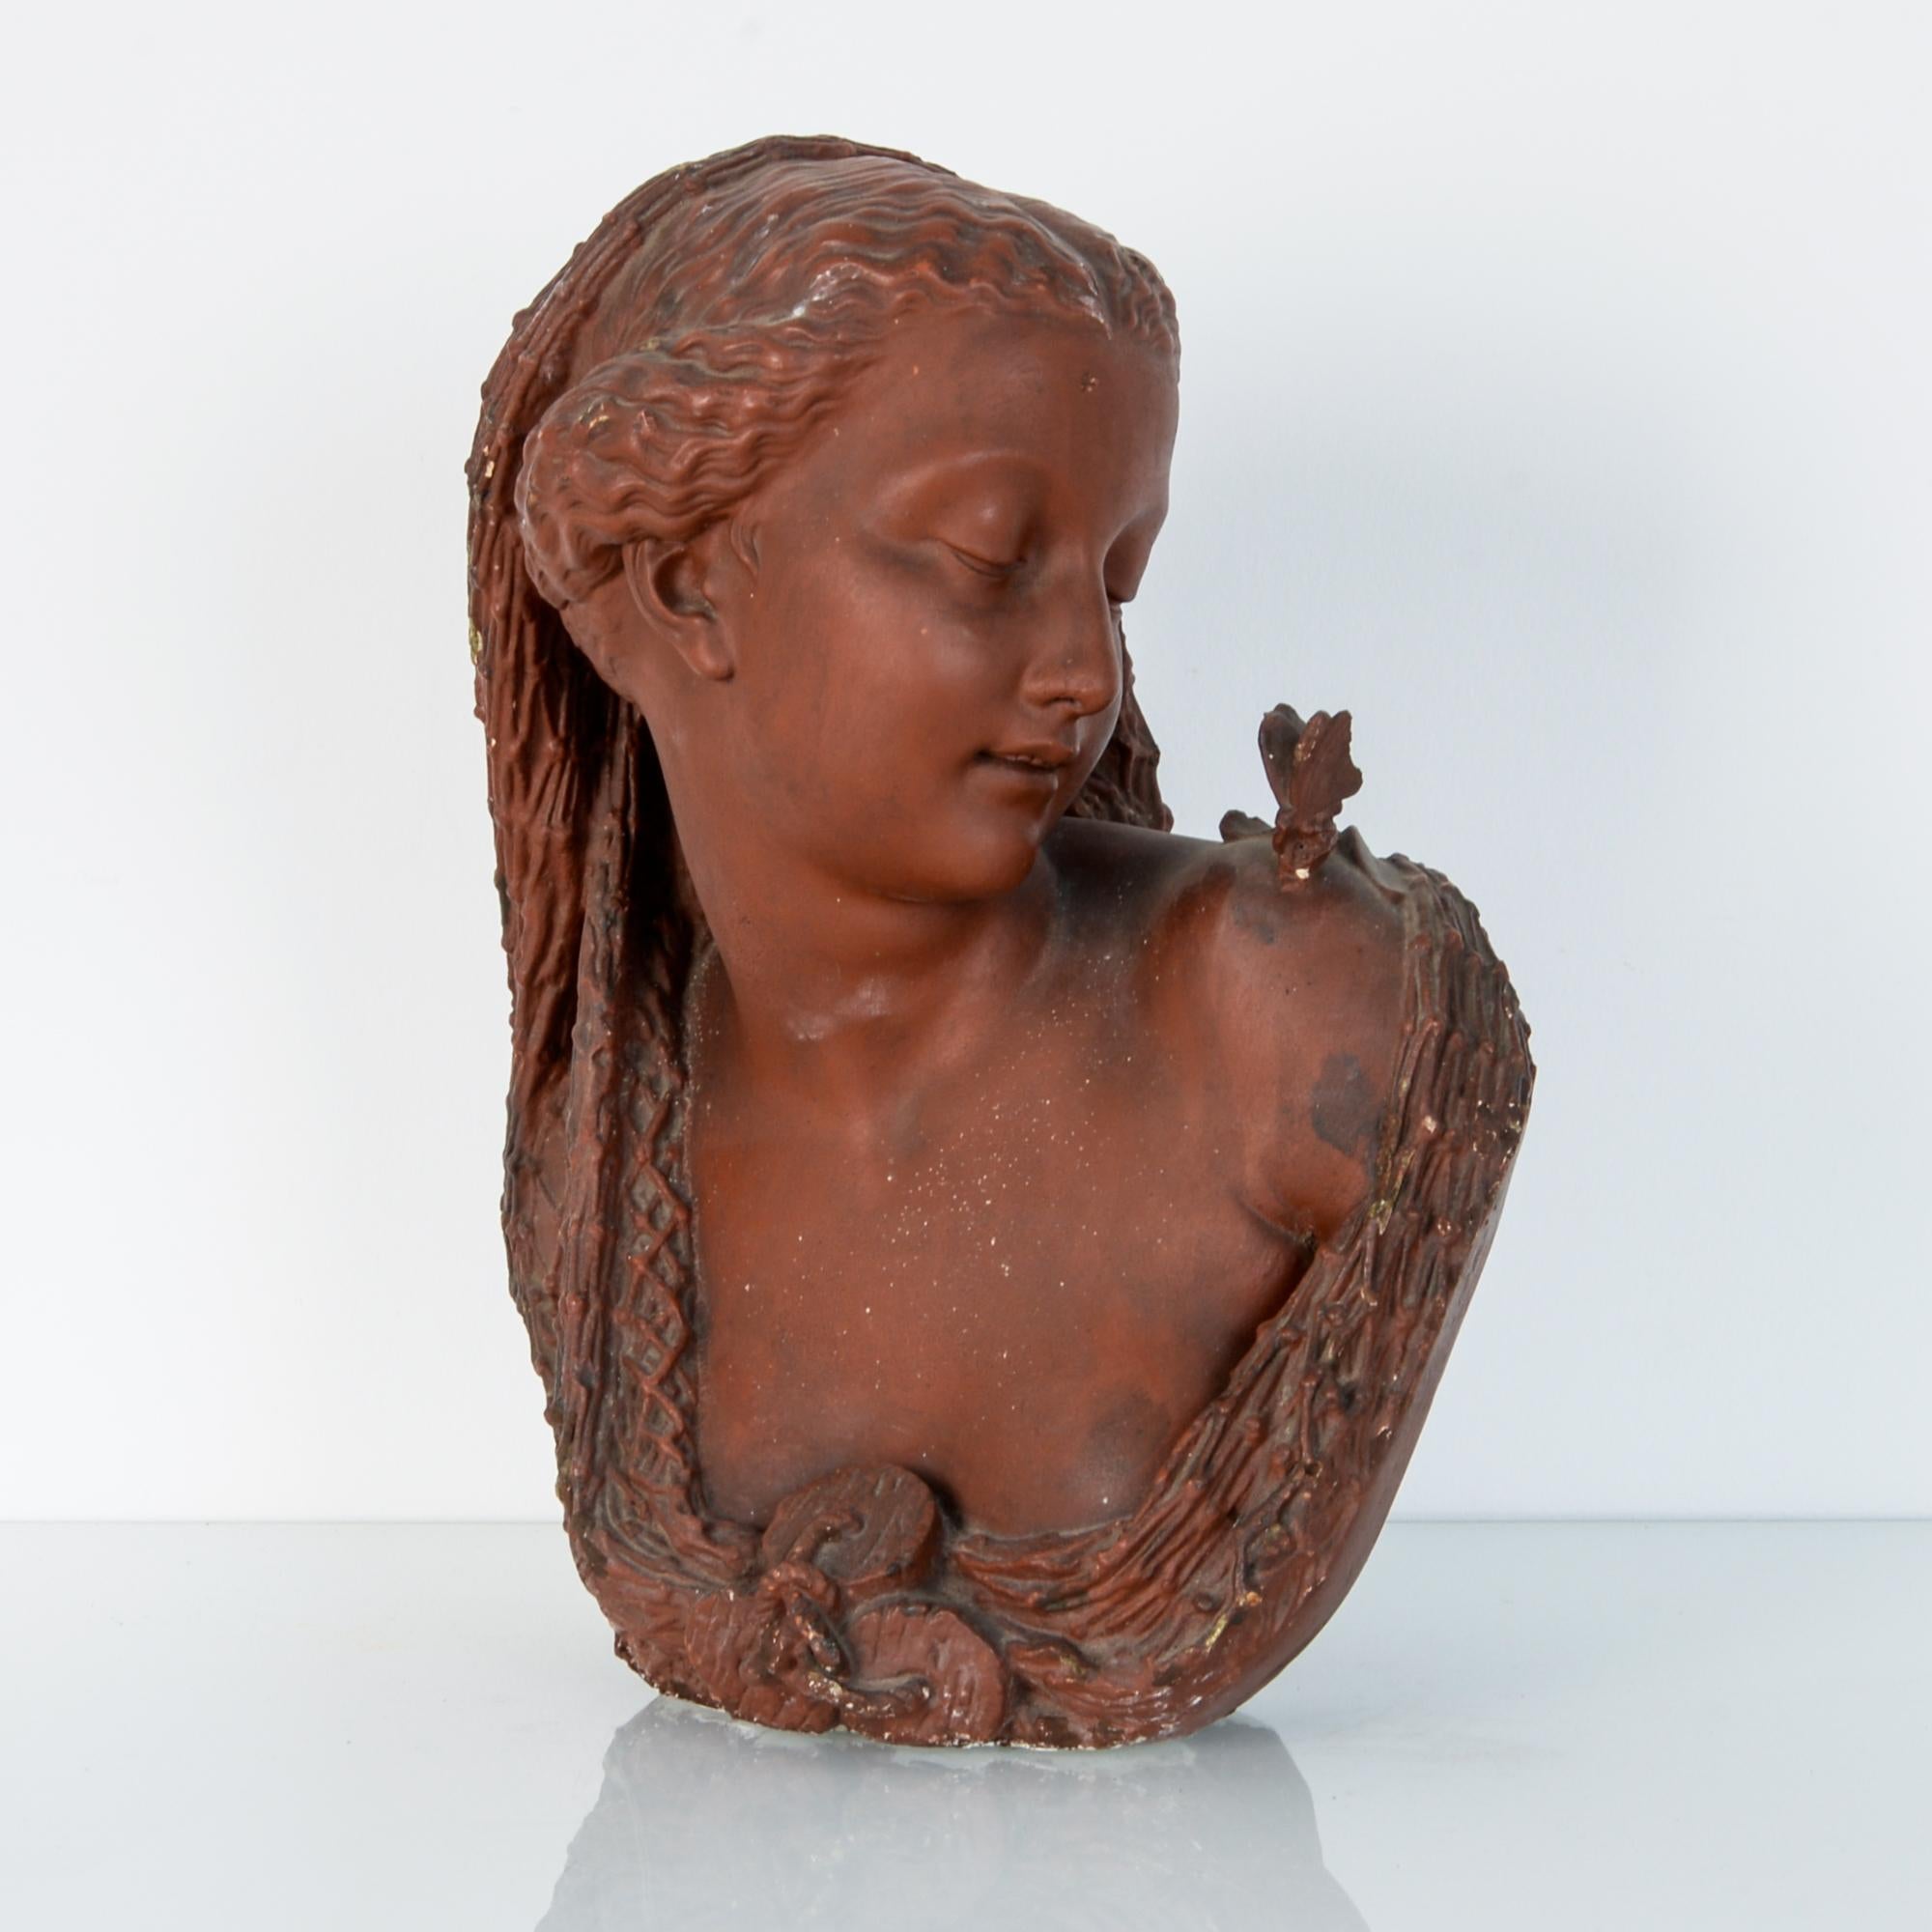 From France, late 19th century, this red painted plaster bust was originally placed in an architectural niche. Depicting a female figure in a pose of delight or curiosity, as intended, serves to enhance and lighten the interior decoration. With a